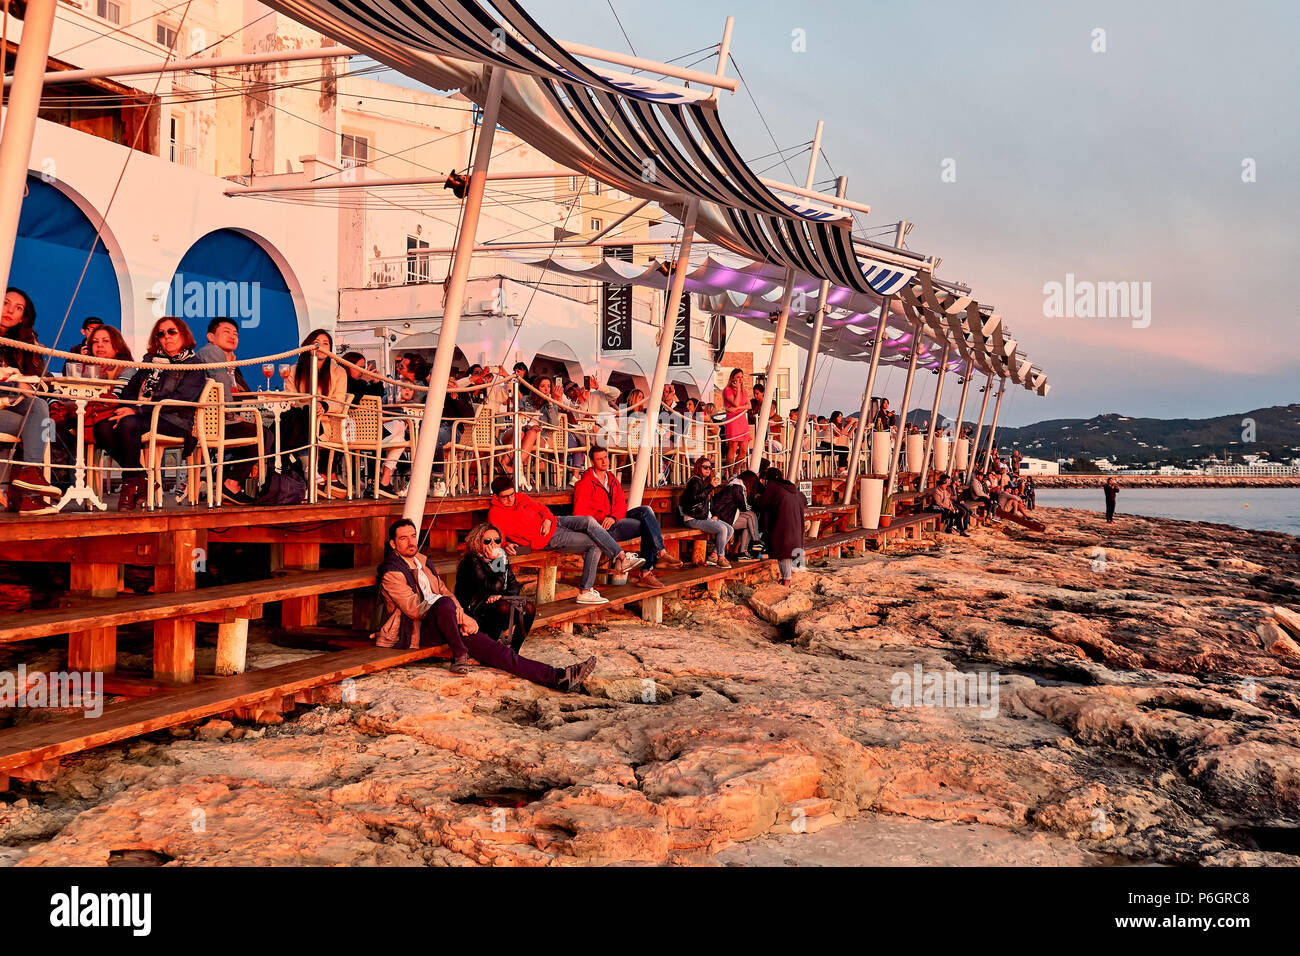 Ibiza Island, Spain - May 1, 2018: Crowds of people meet the sunset at the seafront terrace of Cafe Del Mar. This place is famous for views to the sun Stock Photo